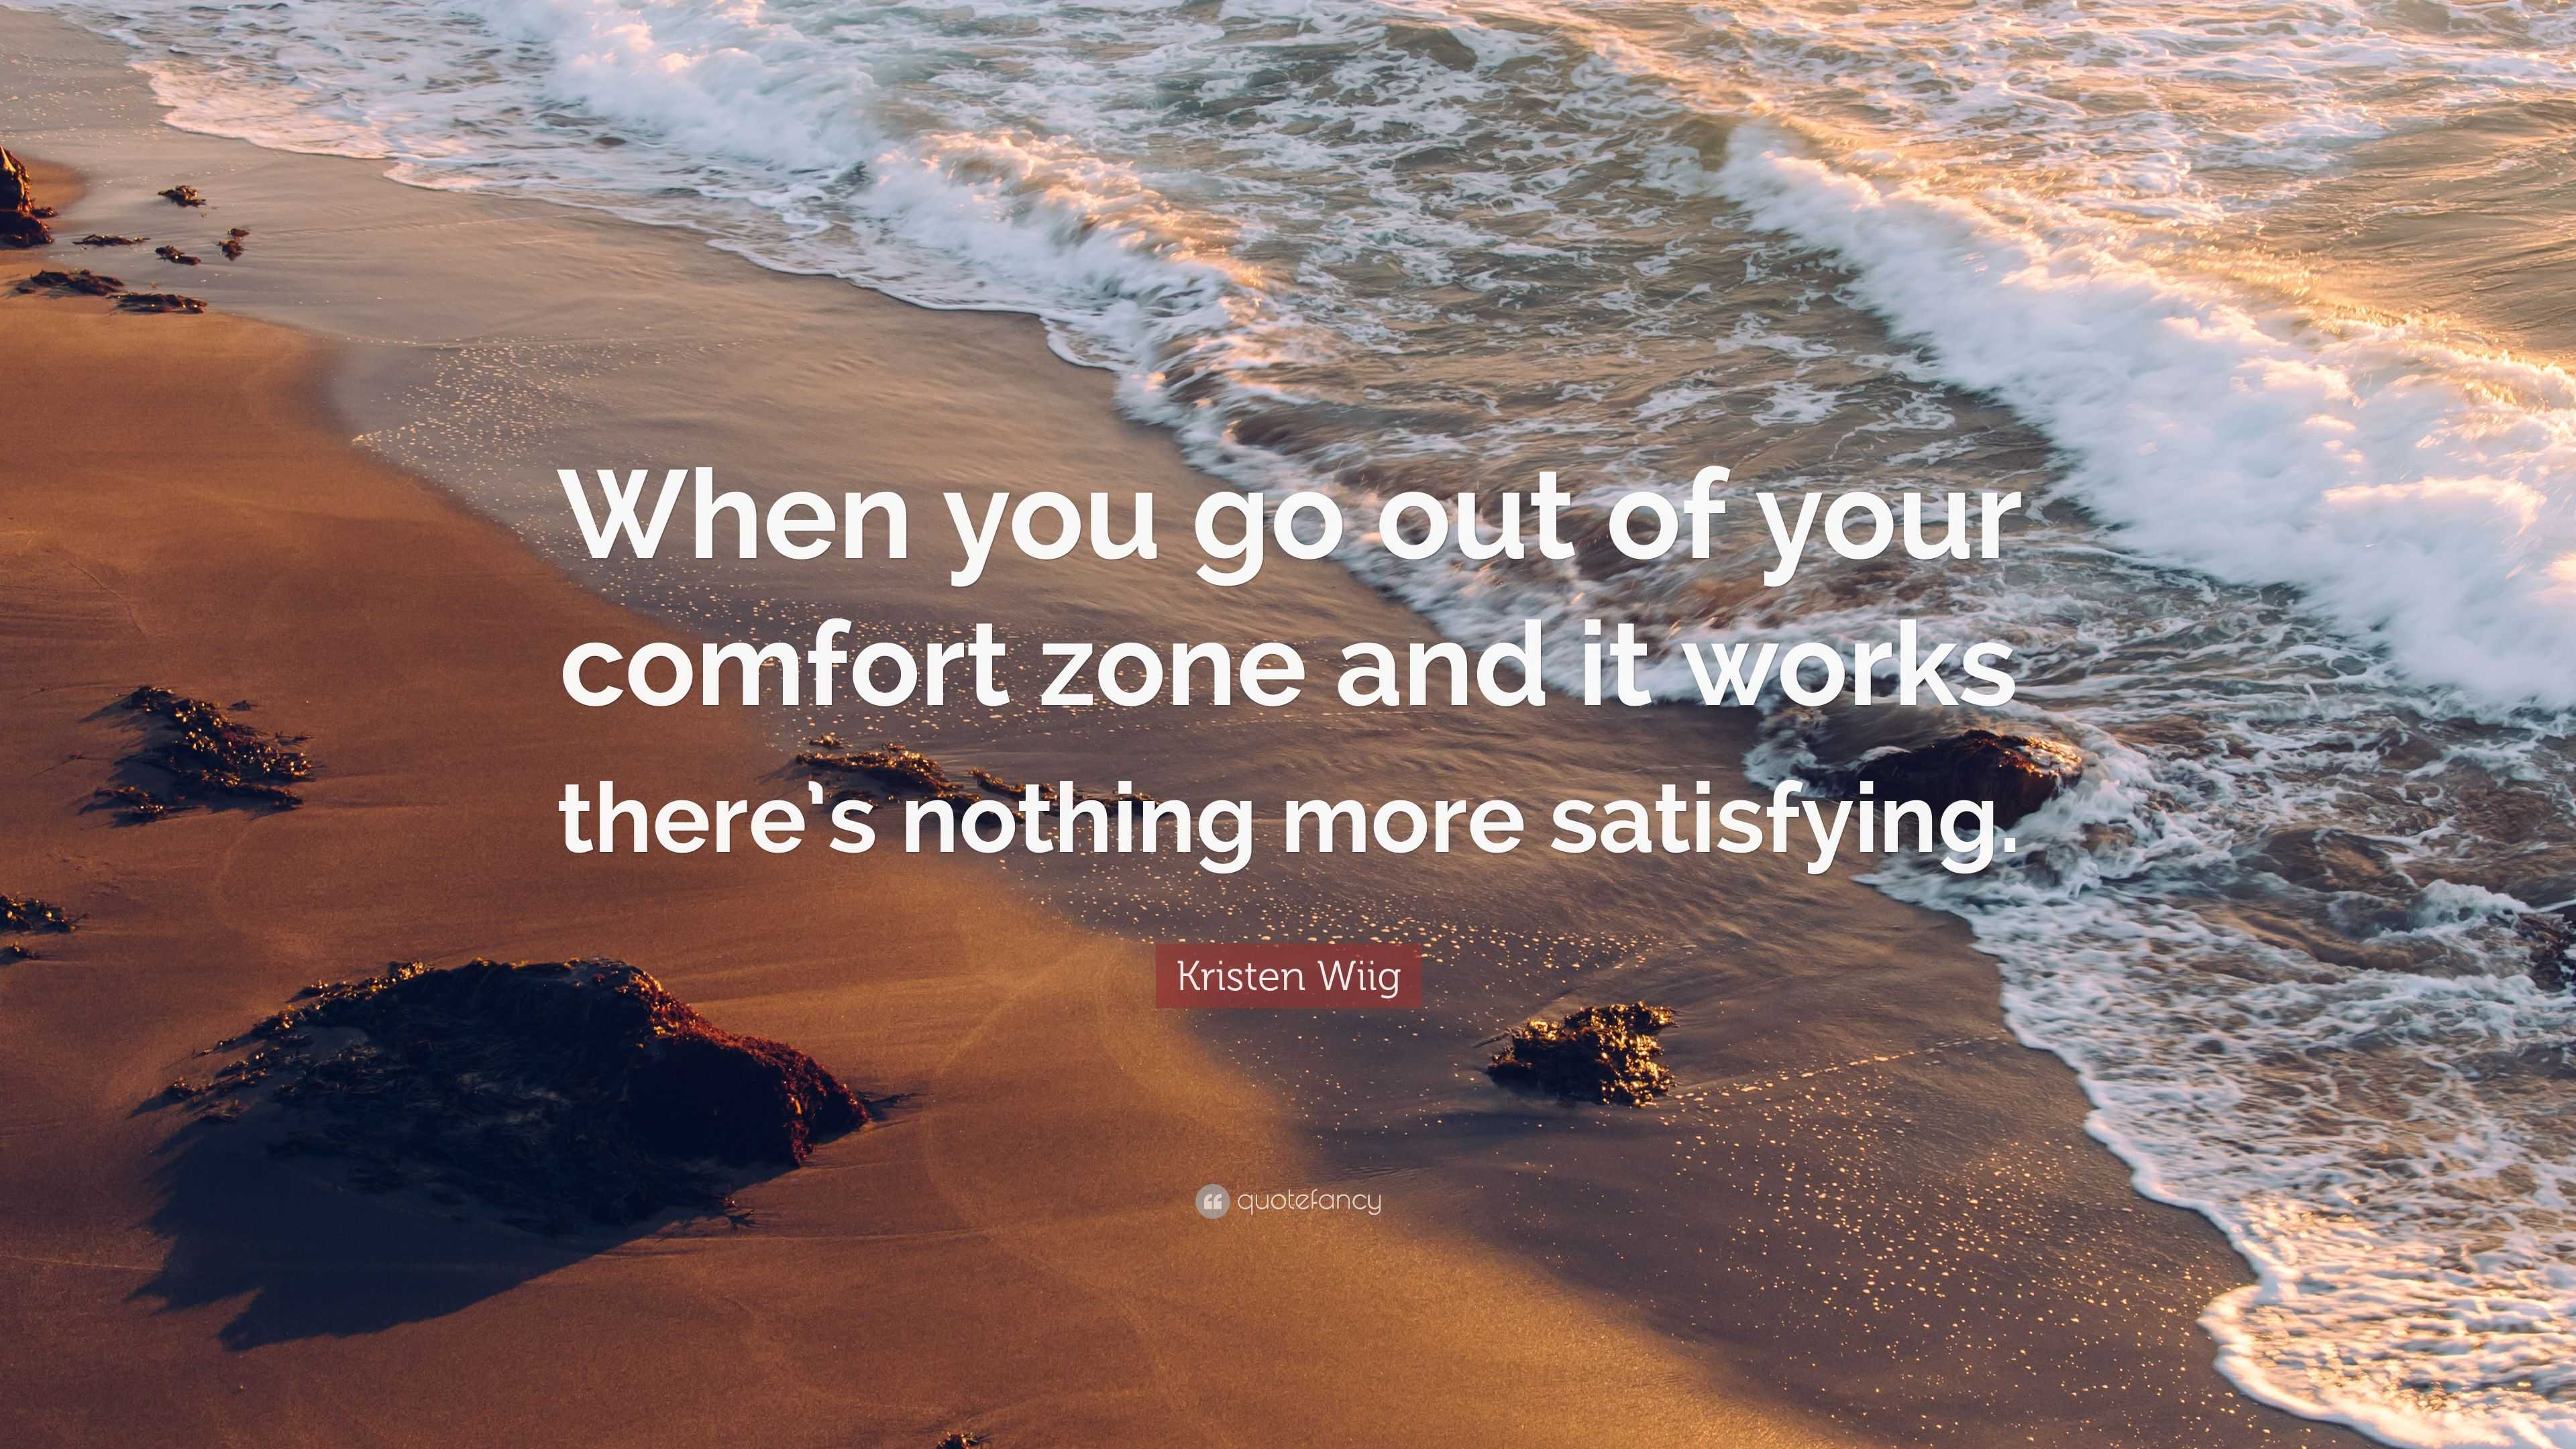 Kristen Wiig Quote “when You Go Out Of Your Comfort Zone And It Works There S Nothing More